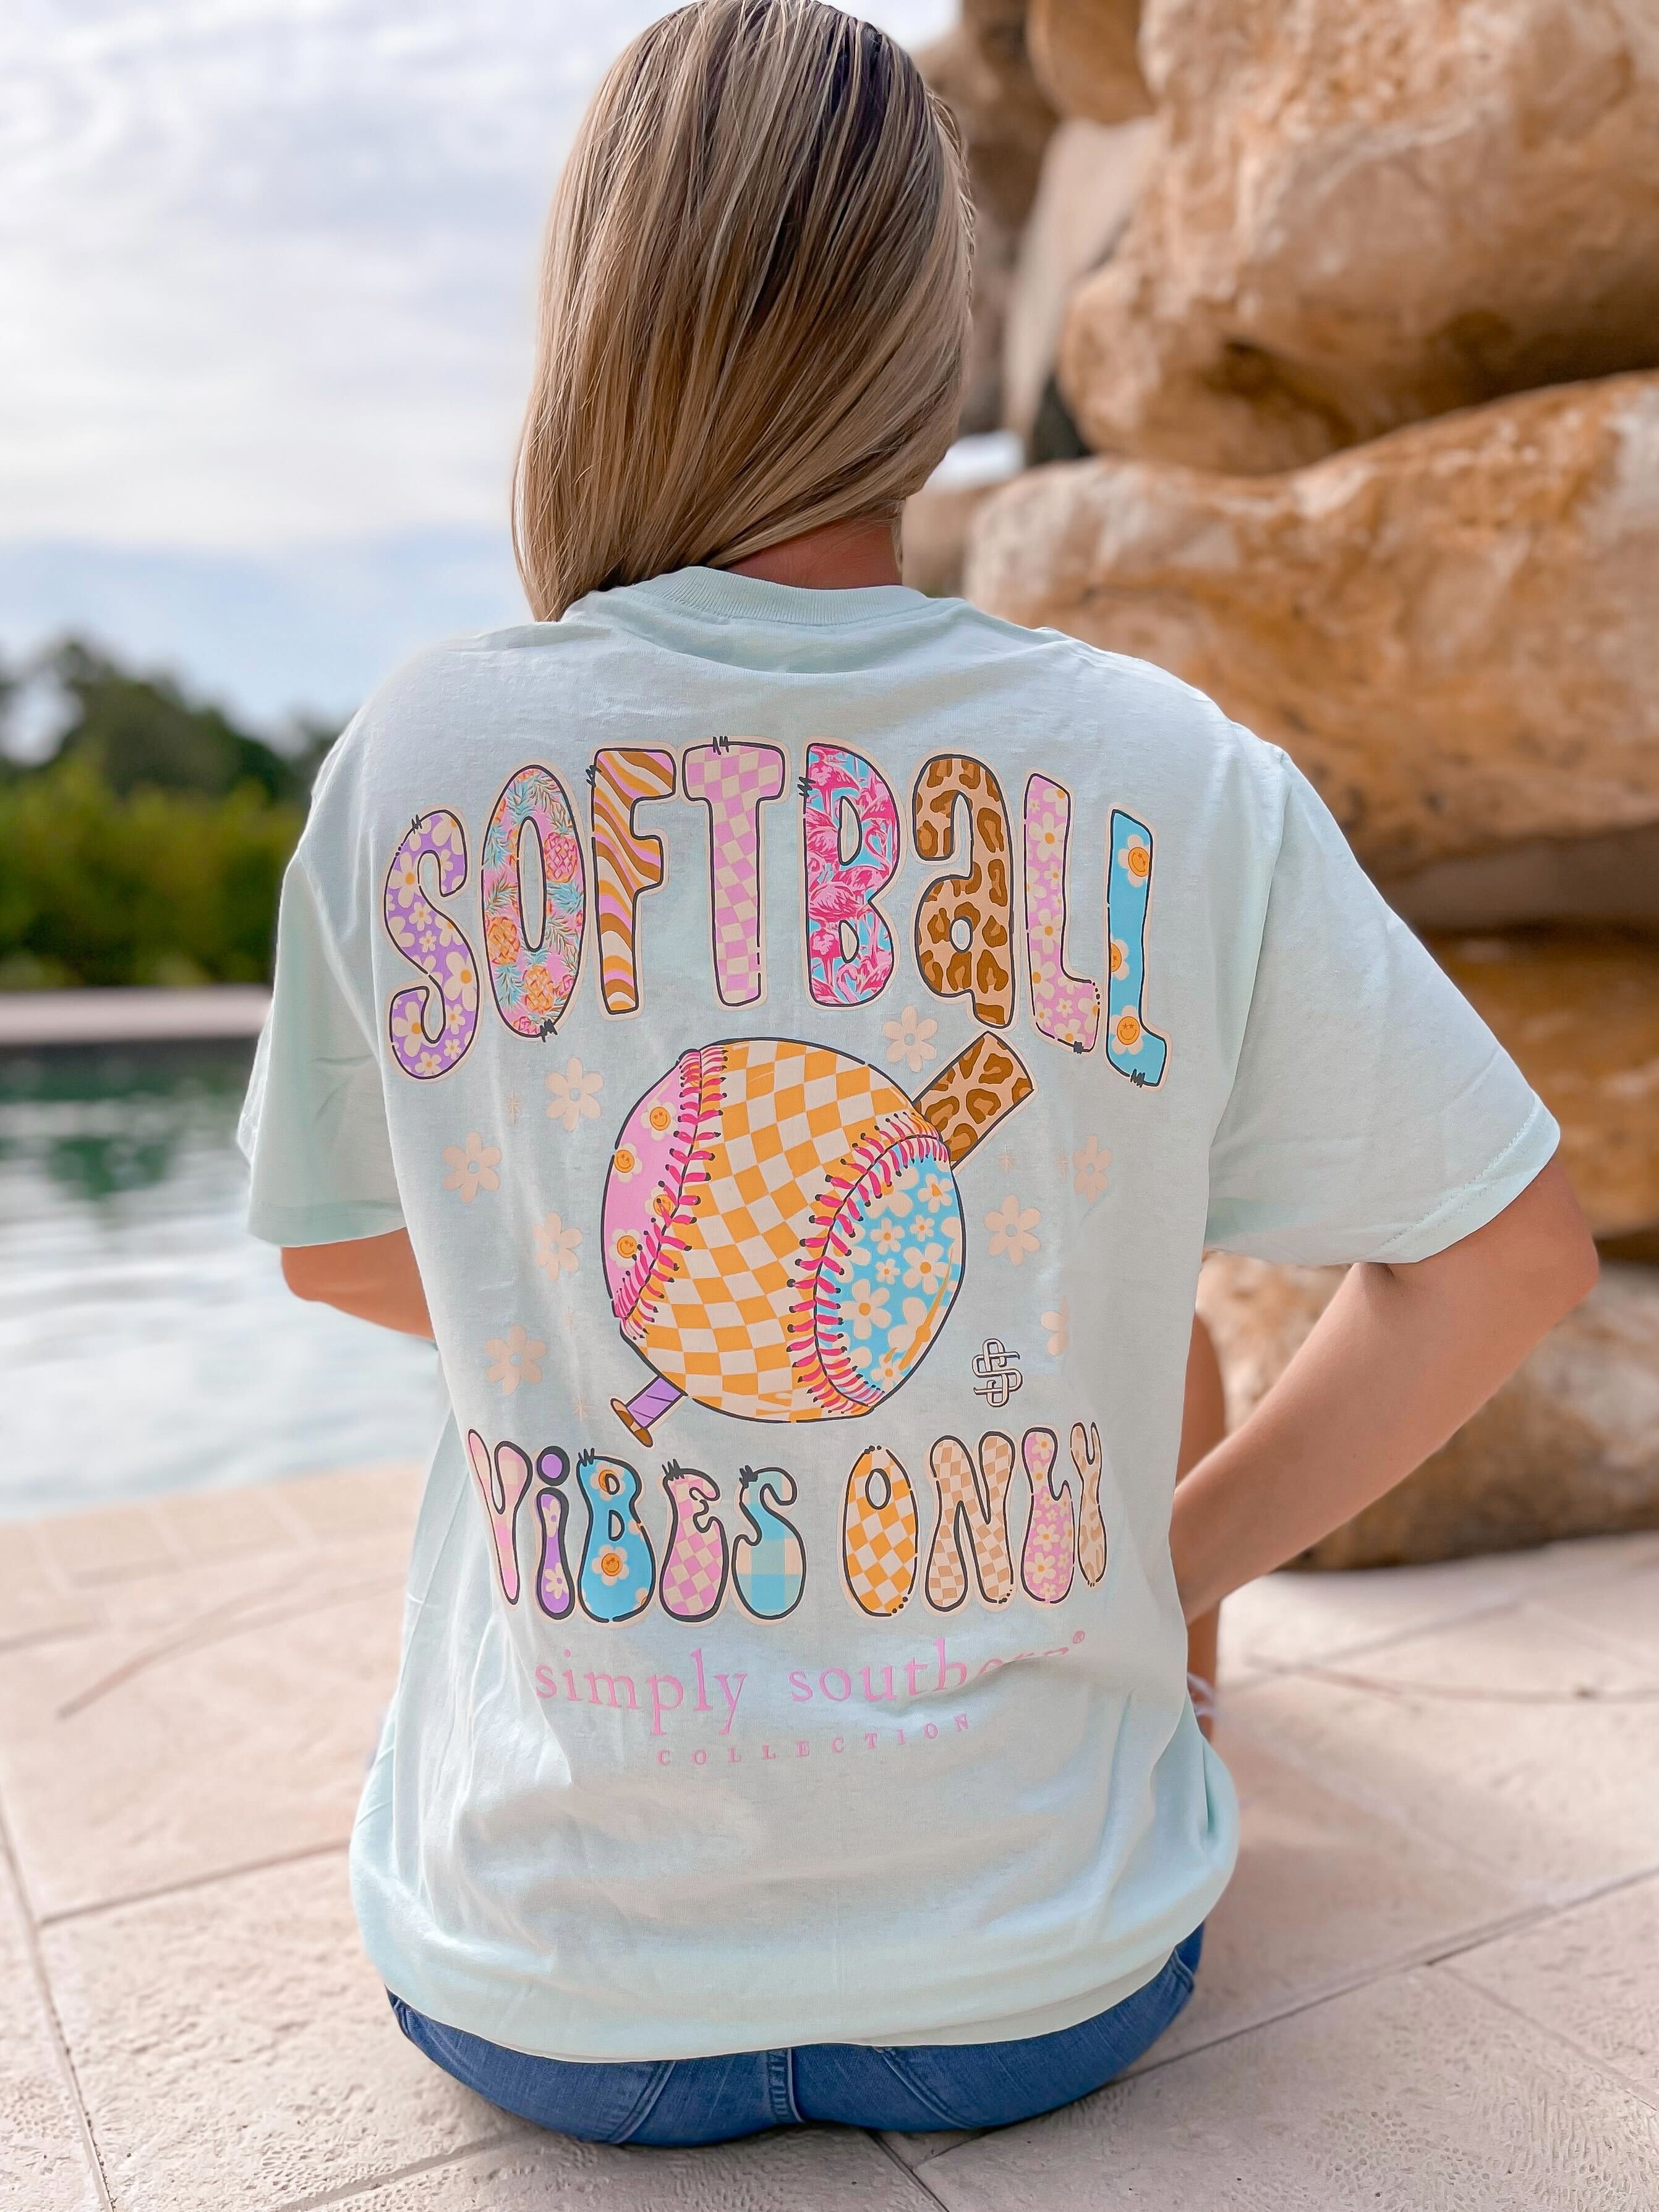 'Softball Vibes Only' Short Sleeve Tee by Simply Southern